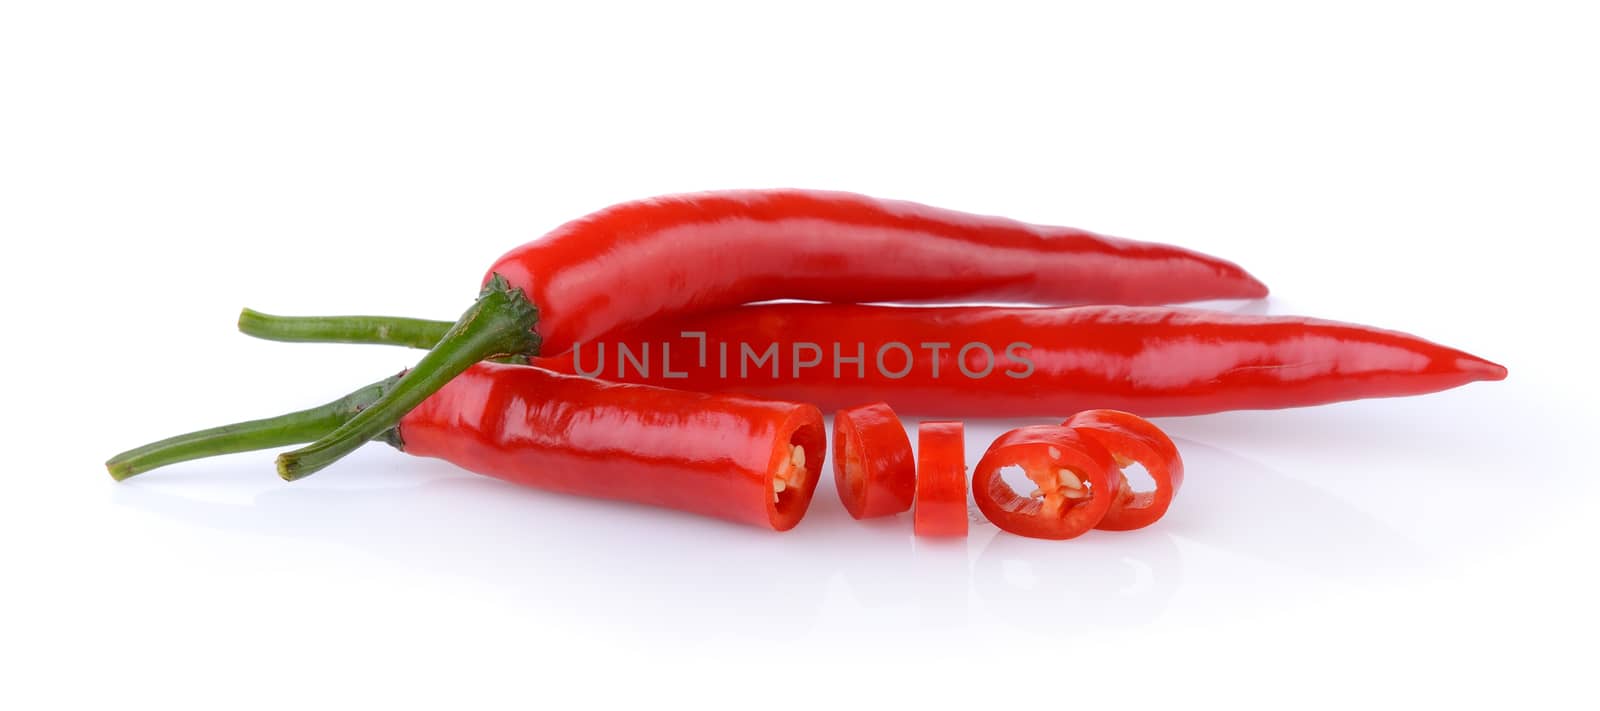 chili pepper on white baackground by sommai